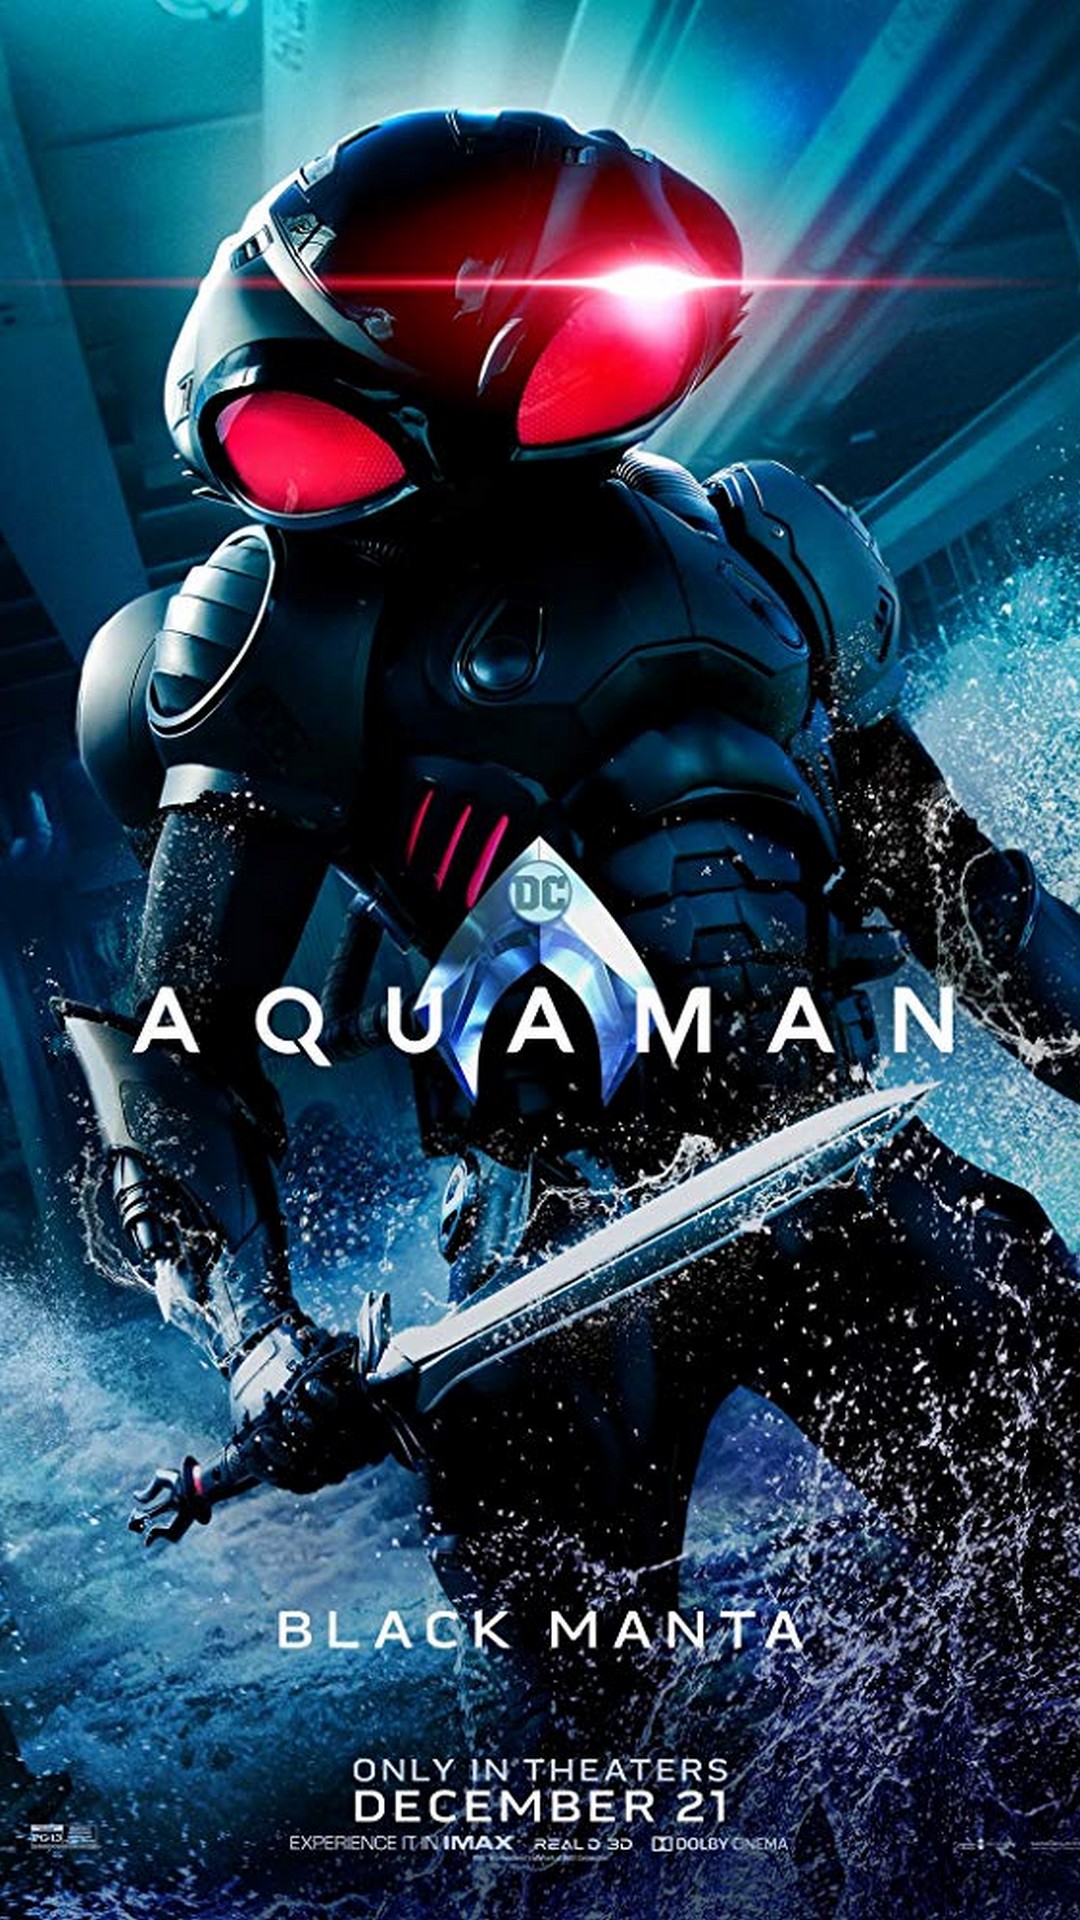 Aquaman 2018 Hd Wallpaper For Iphone With Image Resolution - HD Wallpaper 